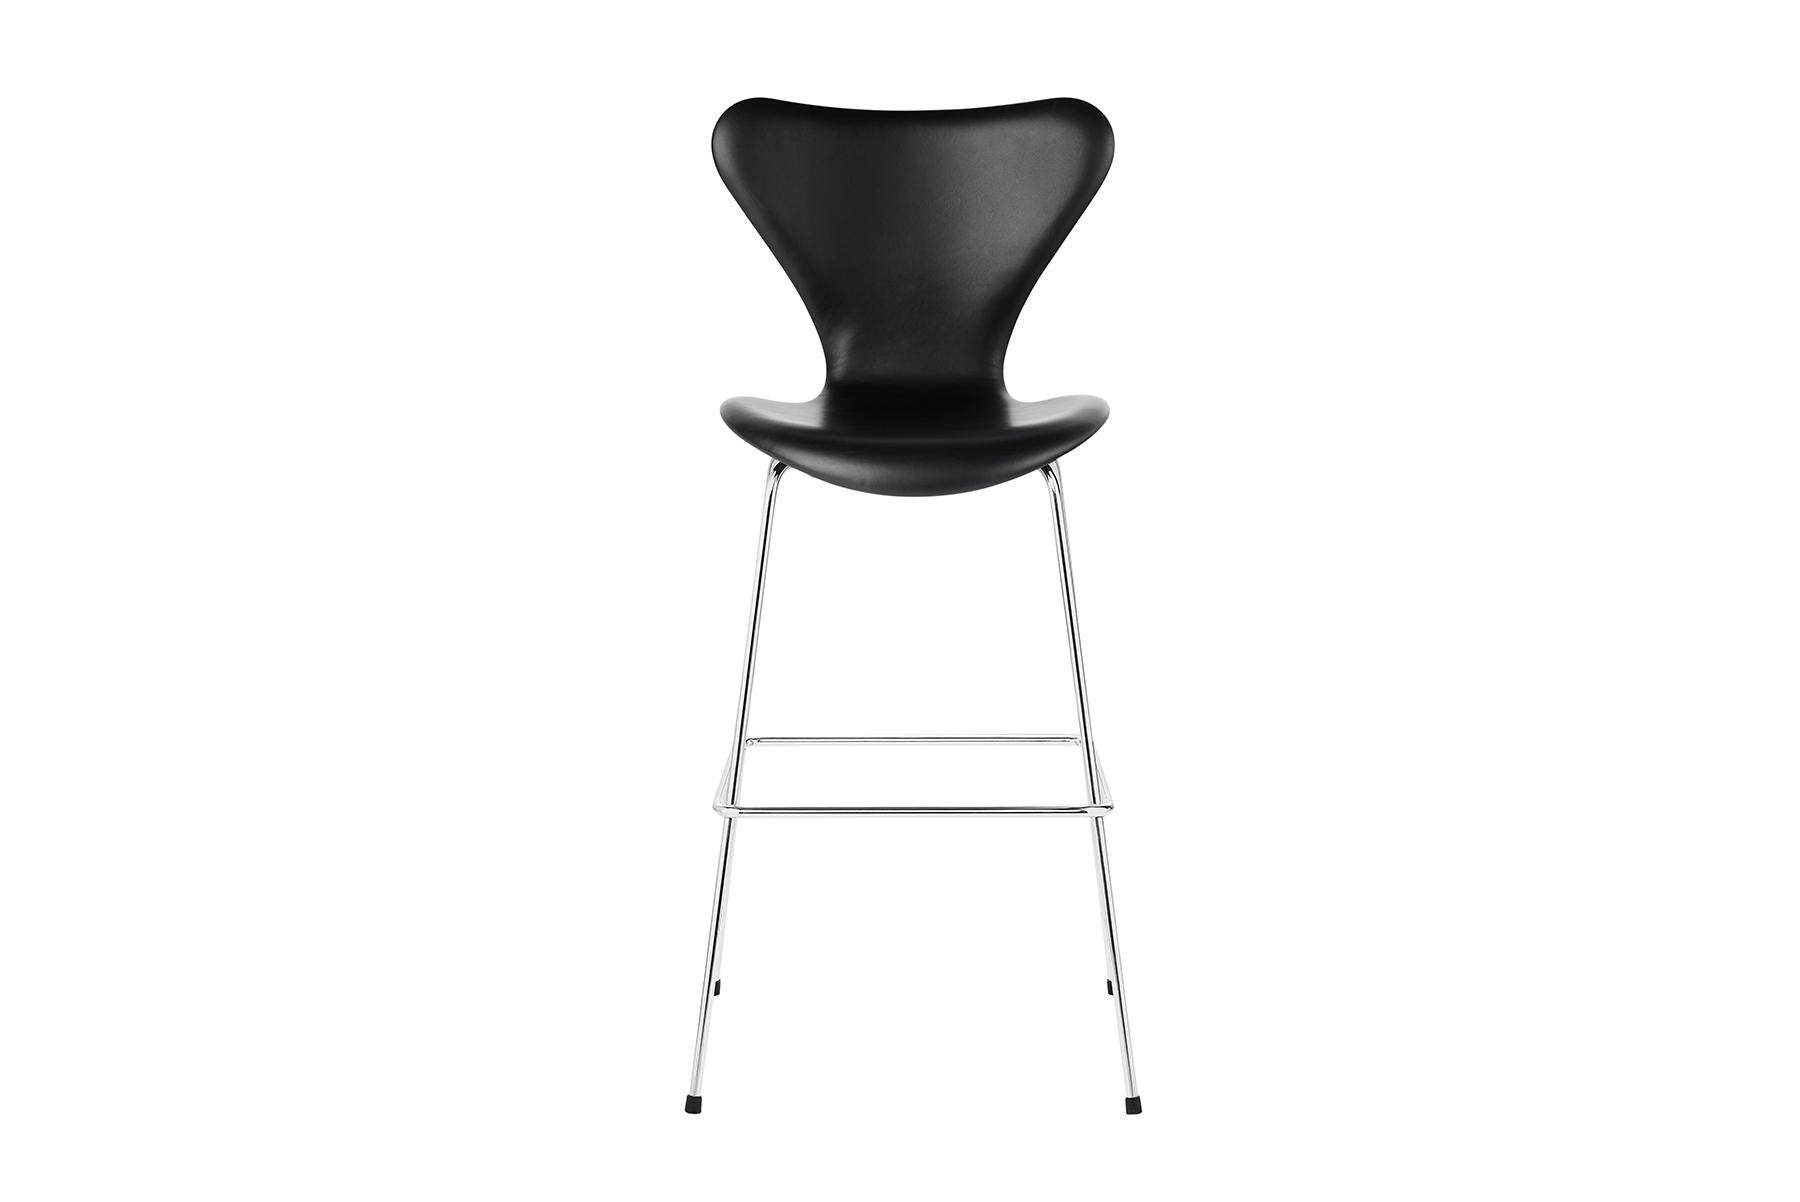 The Series 7 barstool is a beautiful, functional and urban extension of the classic Series 7 chair designed by Arne Jacobsen in 1955. The chair is by far the most sold chair in the history of Fritz Hansen and perhaps also in furniture history. The